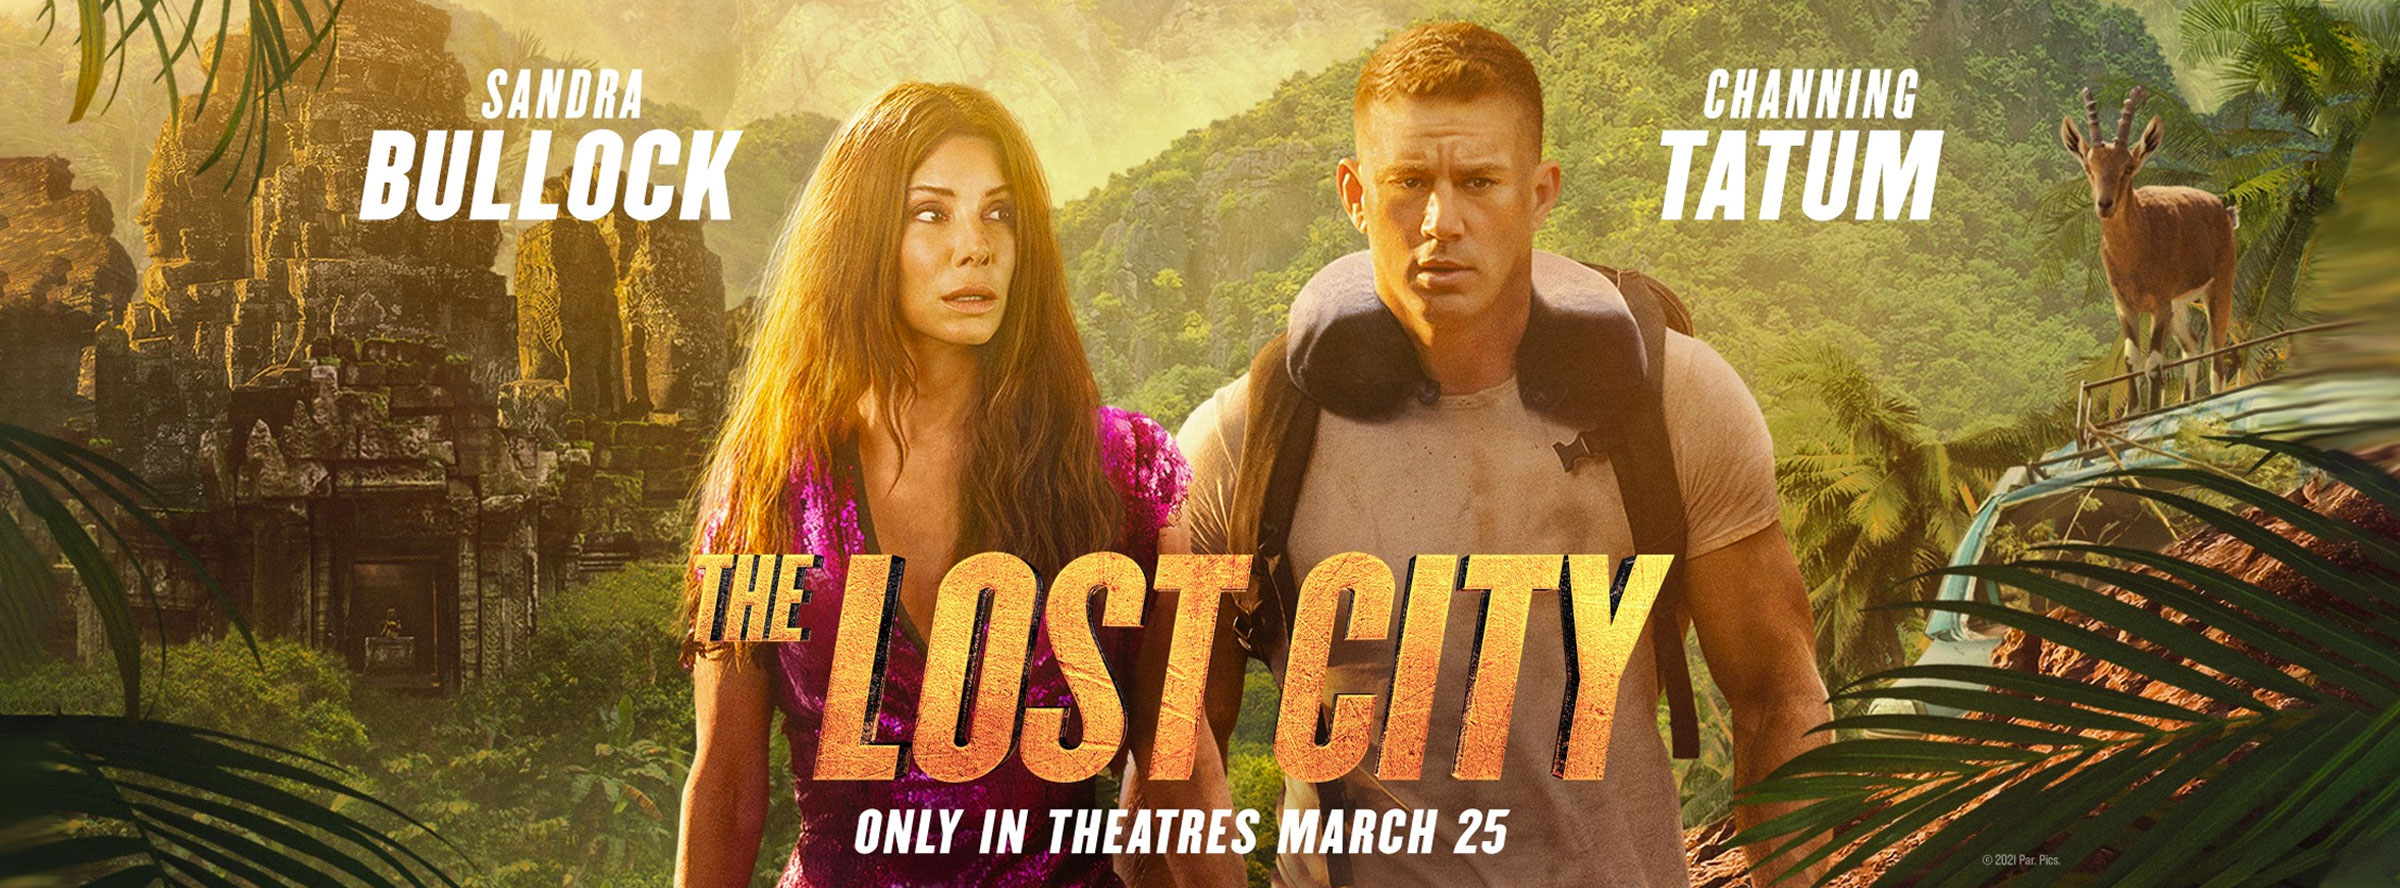 Slider Image for Lost City, The